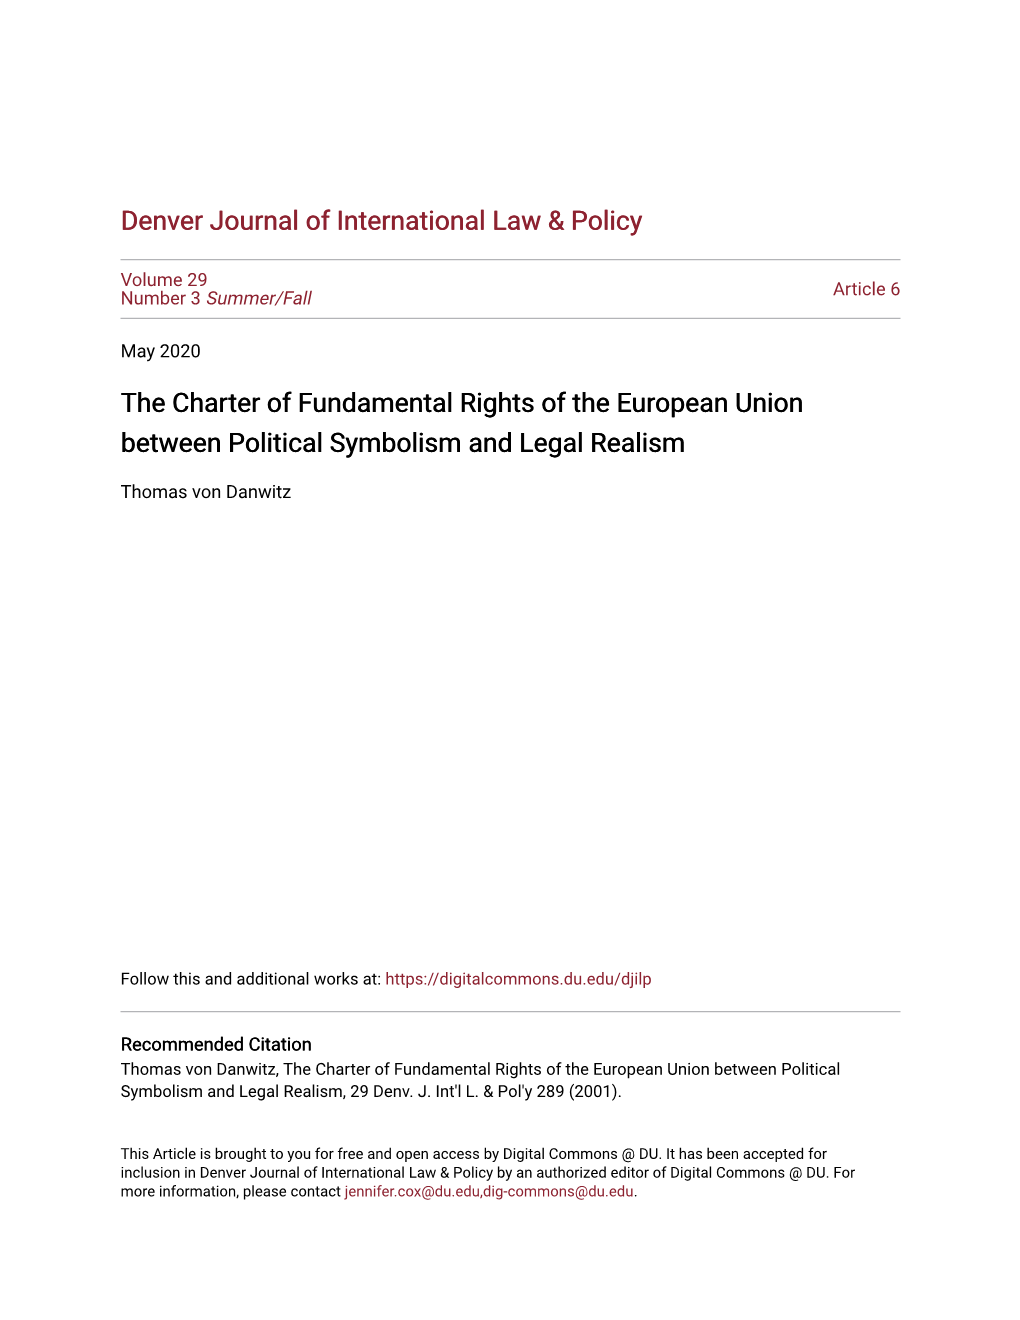 The Charter of Fundamental Rights of the European Union Between Political Symbolism and Legal Realism